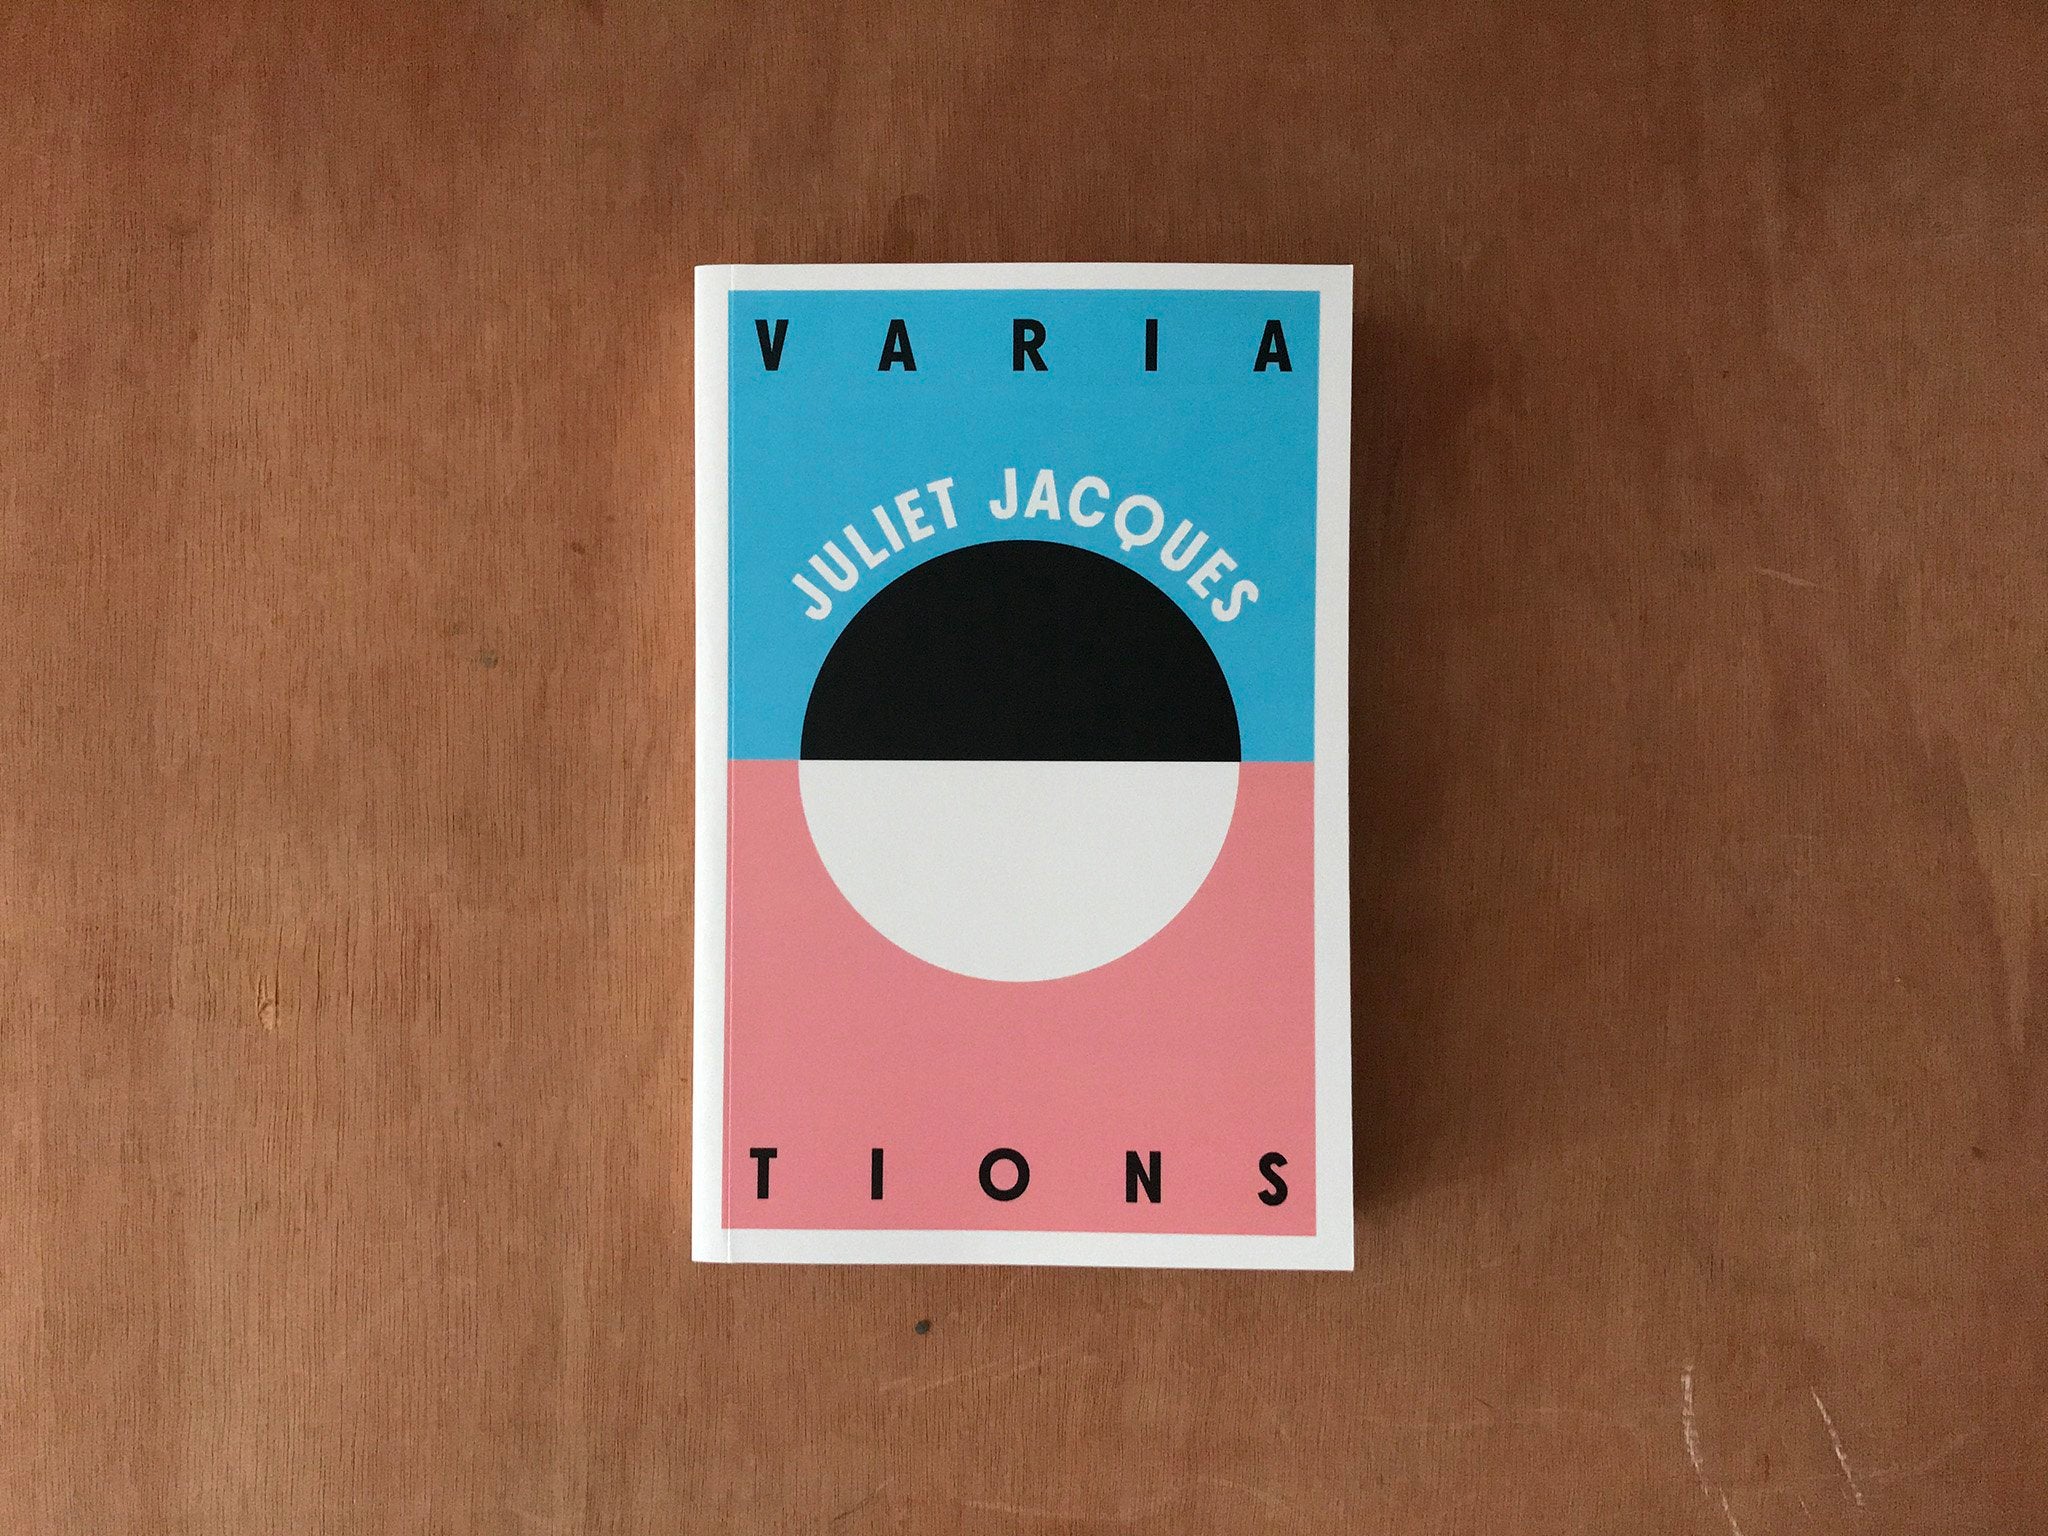 VARIATIONS by Juliet Jacques